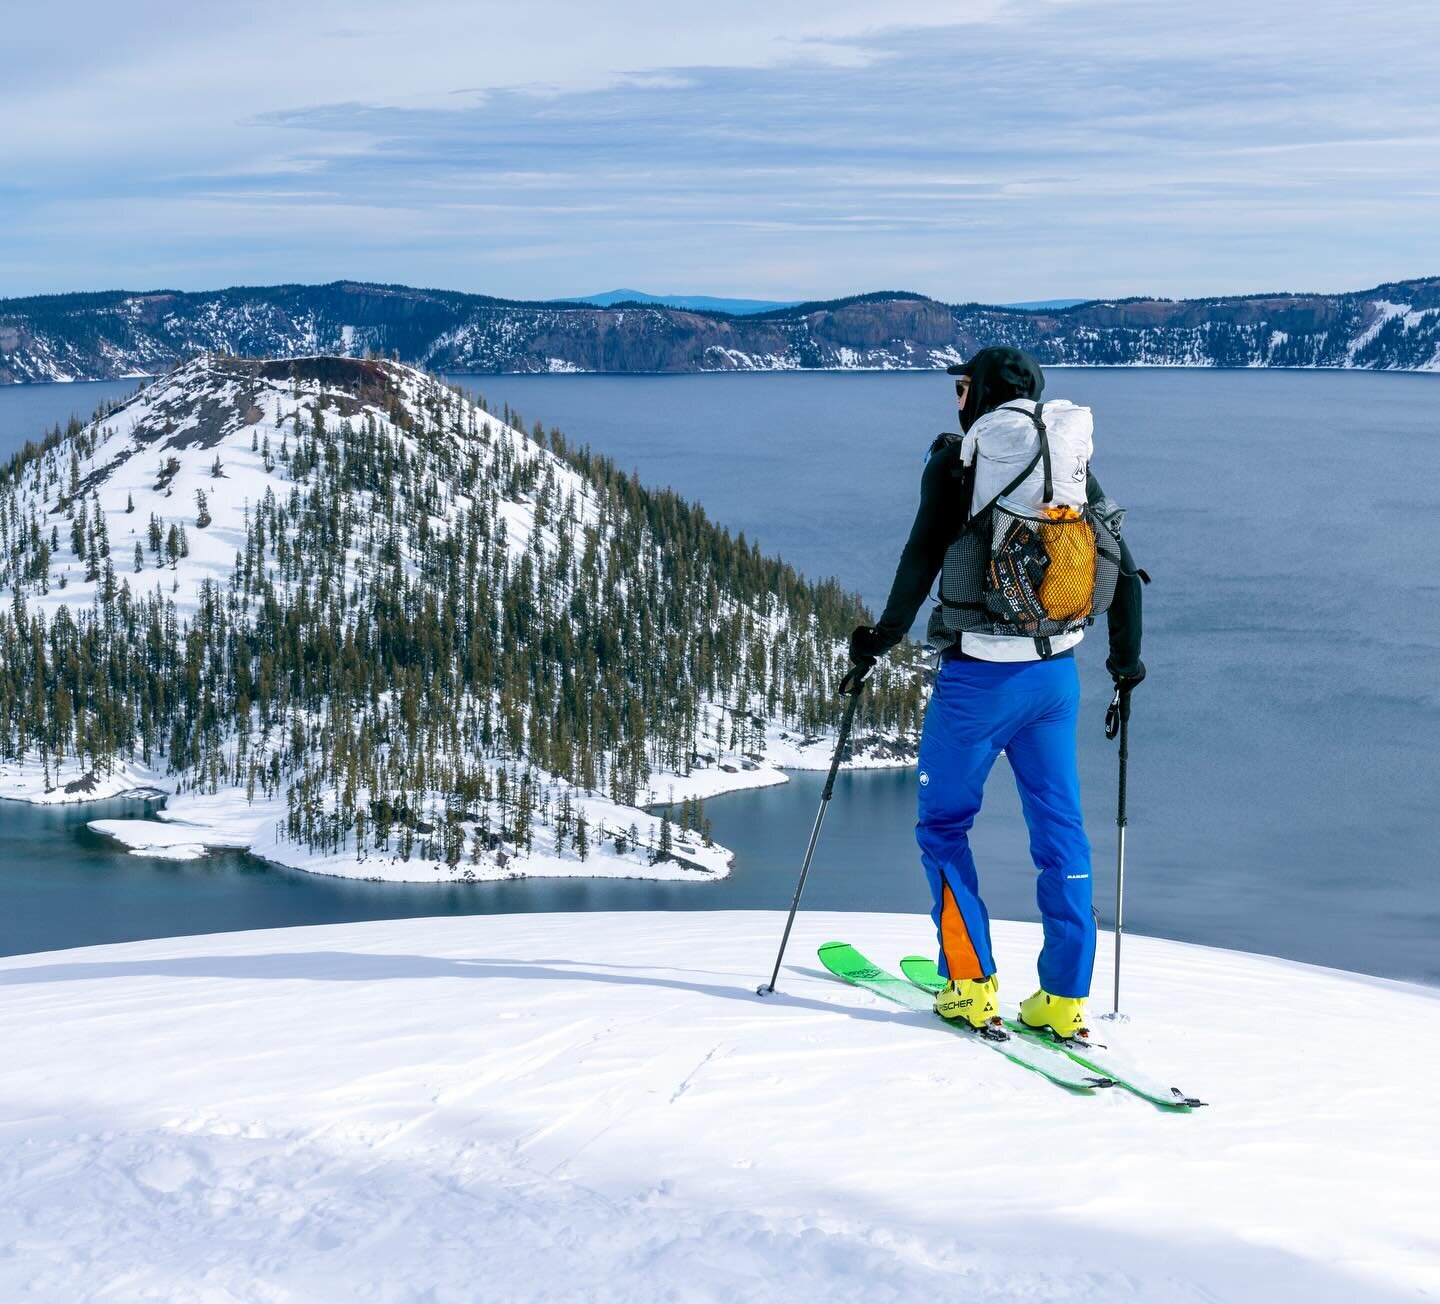 A couple Februaries ago I got the opportunity to ski around Crater Lake with a couple pals - it was a unique experience that served as a great introduction to ski touring. I&rsquo;ve written a report detailing what it took to accomplish the three-day